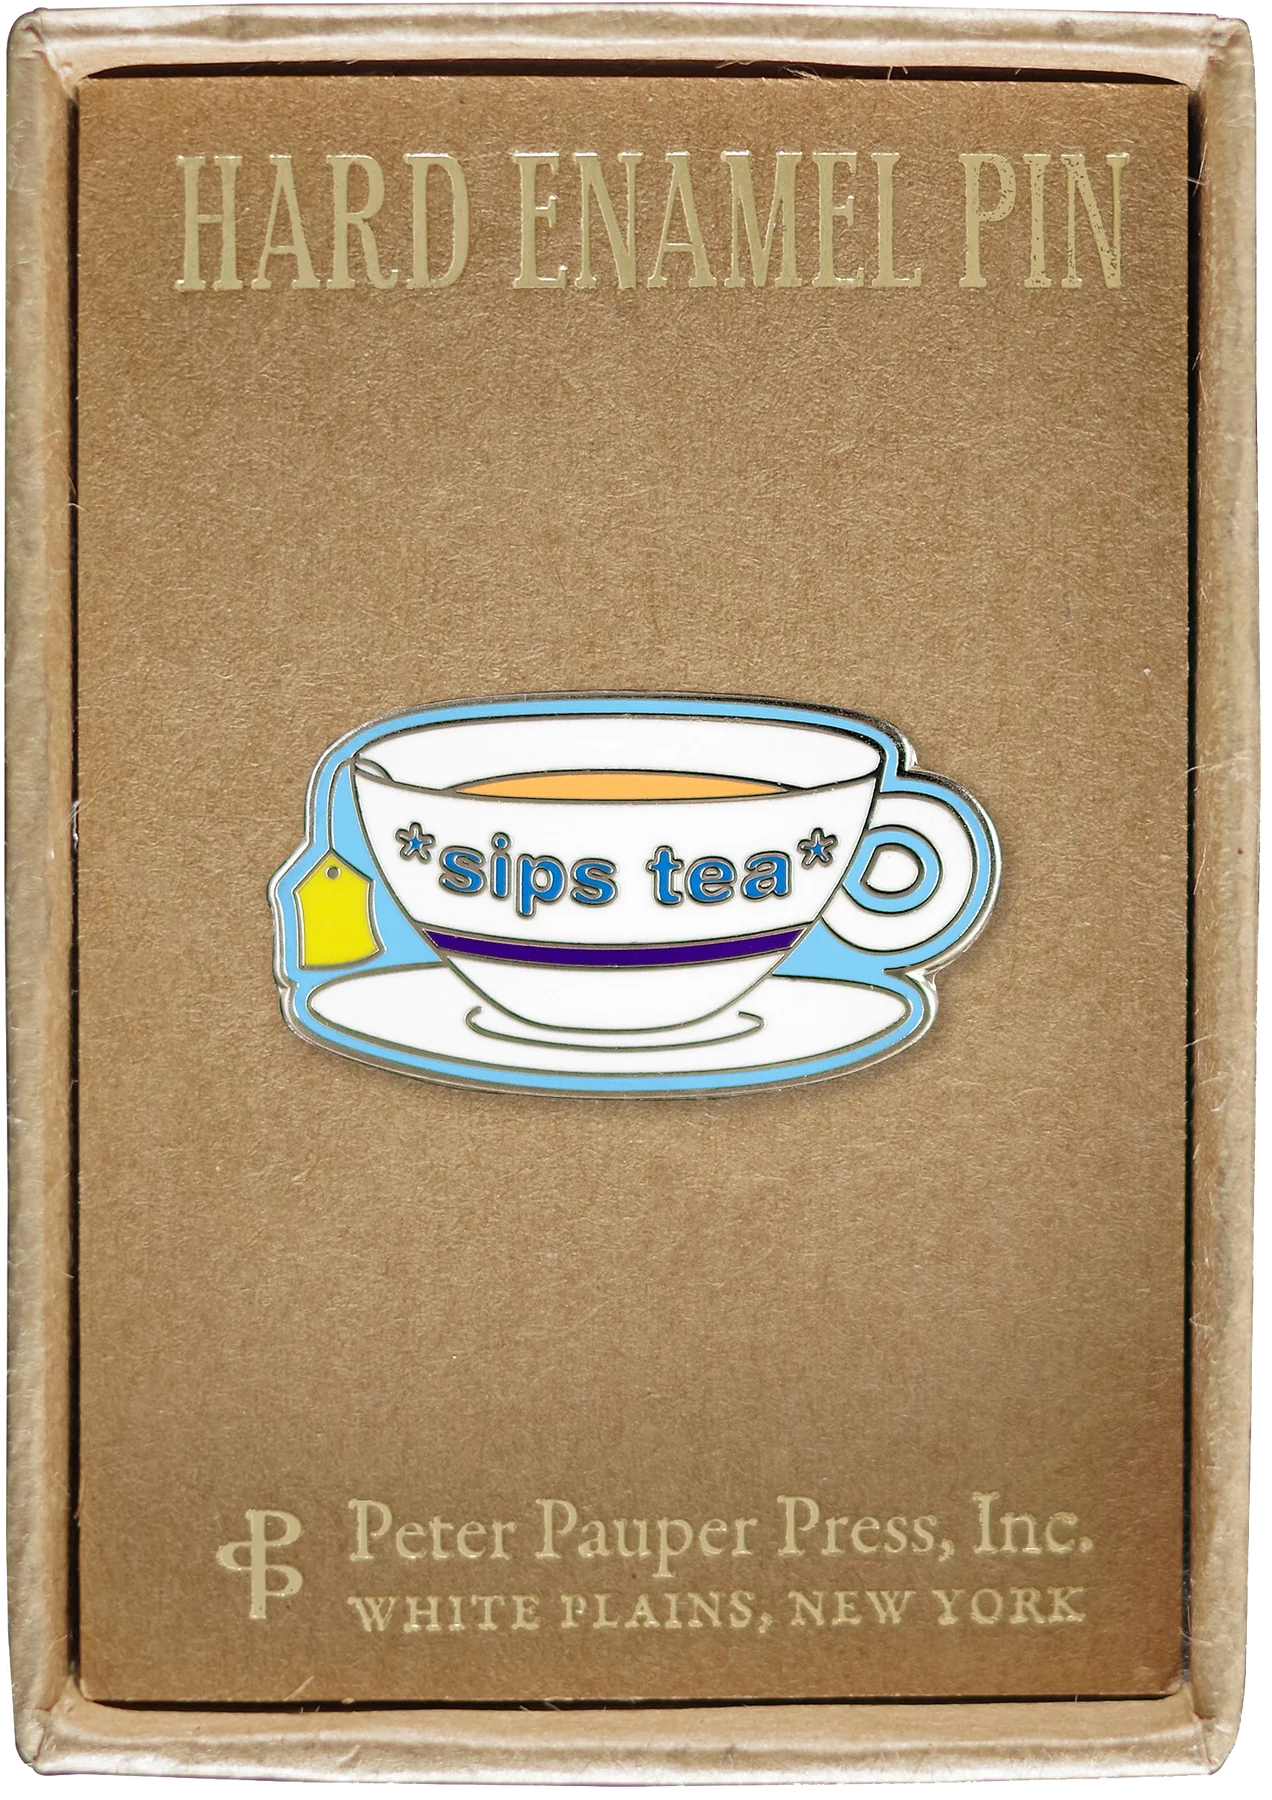 white tea glass and plate with a blue stripe, yellow tea bag label, and light blue text that says *sips tea* attached to a box that says hard enamel pin